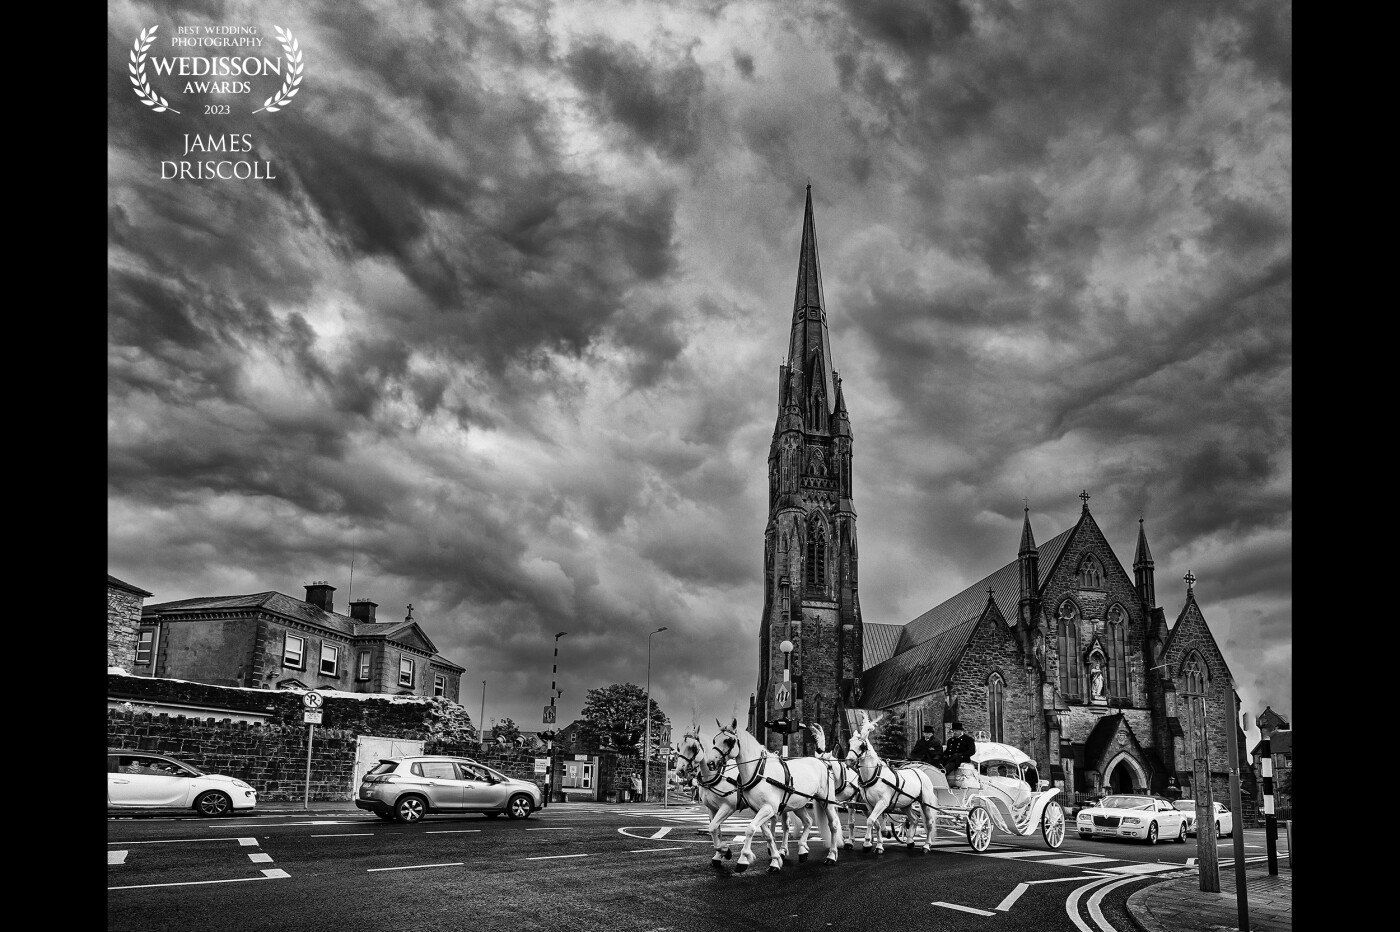 Bride and groom leaving a church in Limerick,,, could have removed the cars, but the expression on the ladies face in the car warranted in me leaving it...